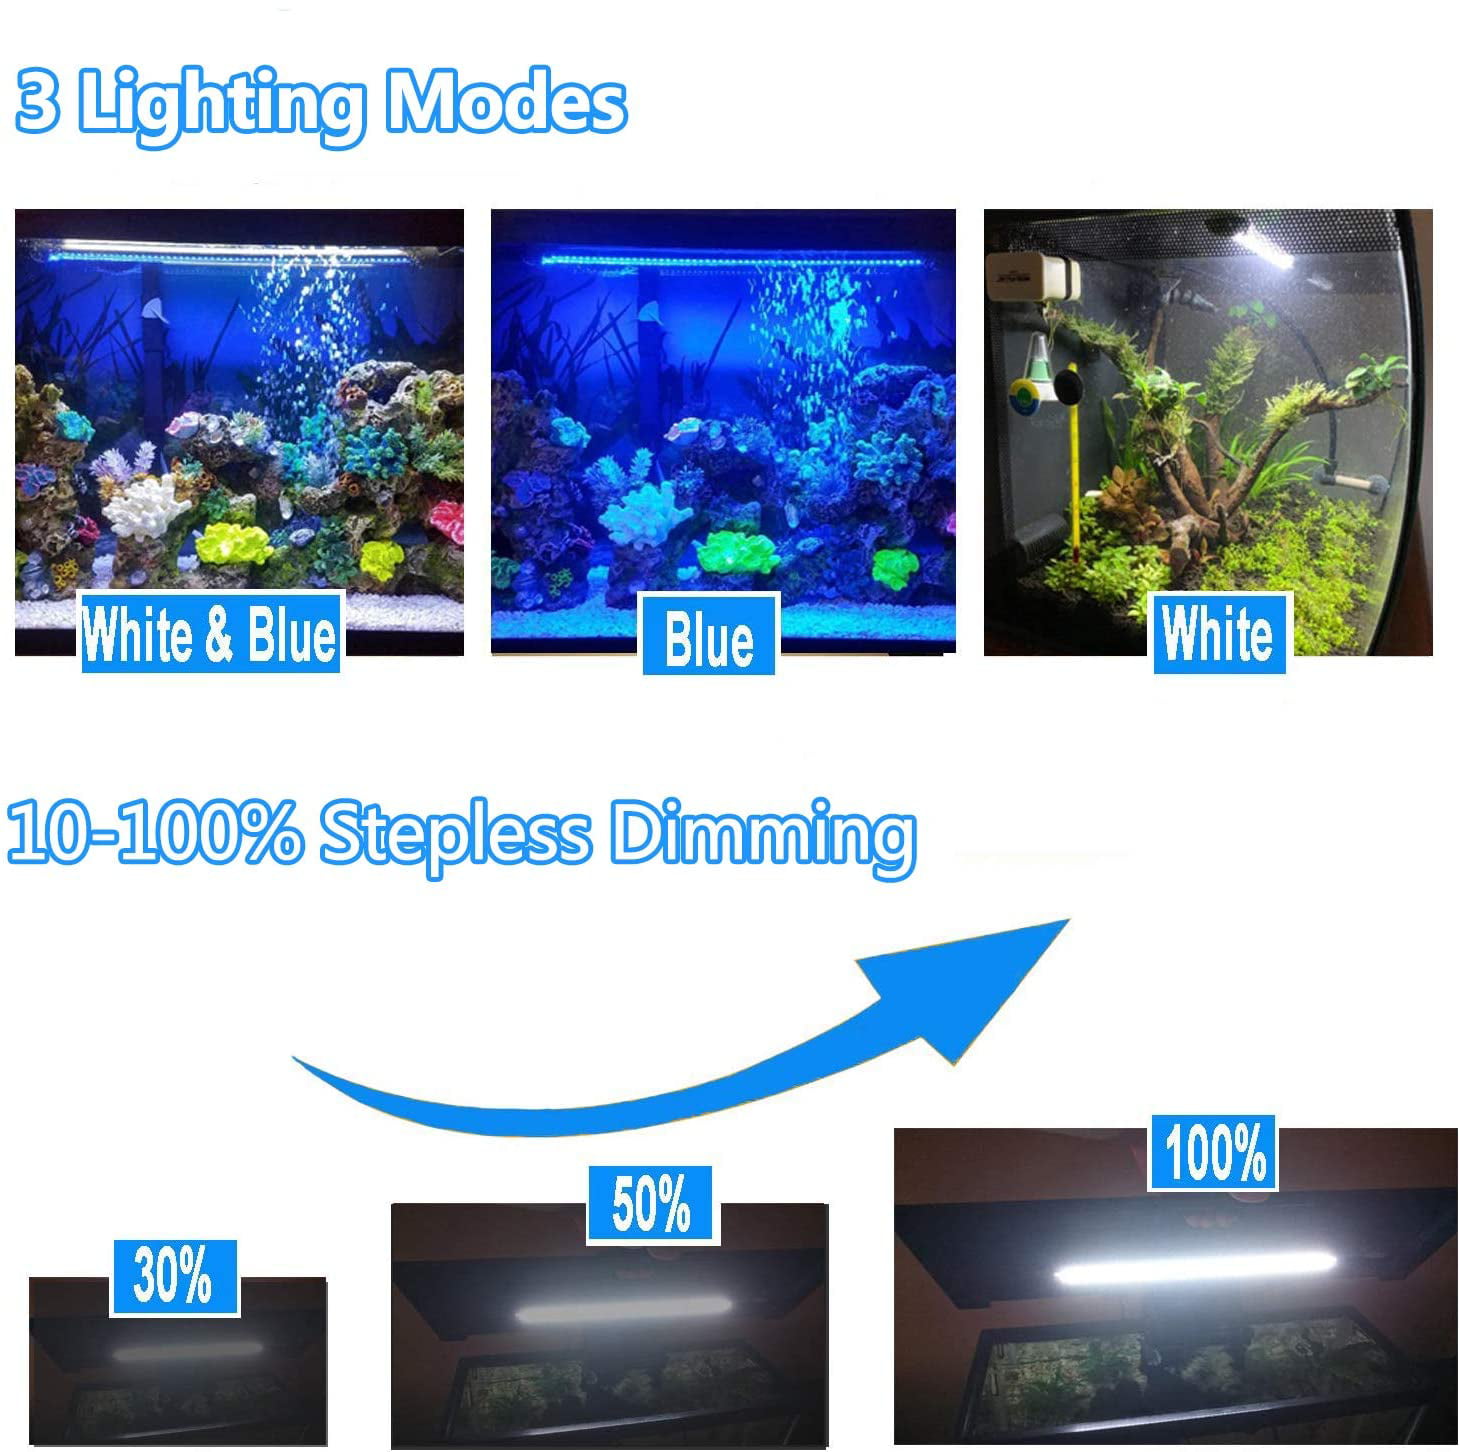 JOYHILL LED Aquarium Light Waterproof Submersible Fish Tank Light with Timer LED Light Bar with 3 Light Modes Dimmable of White & Blue Light for Fish Tank 18CM Timer & Dimmer 